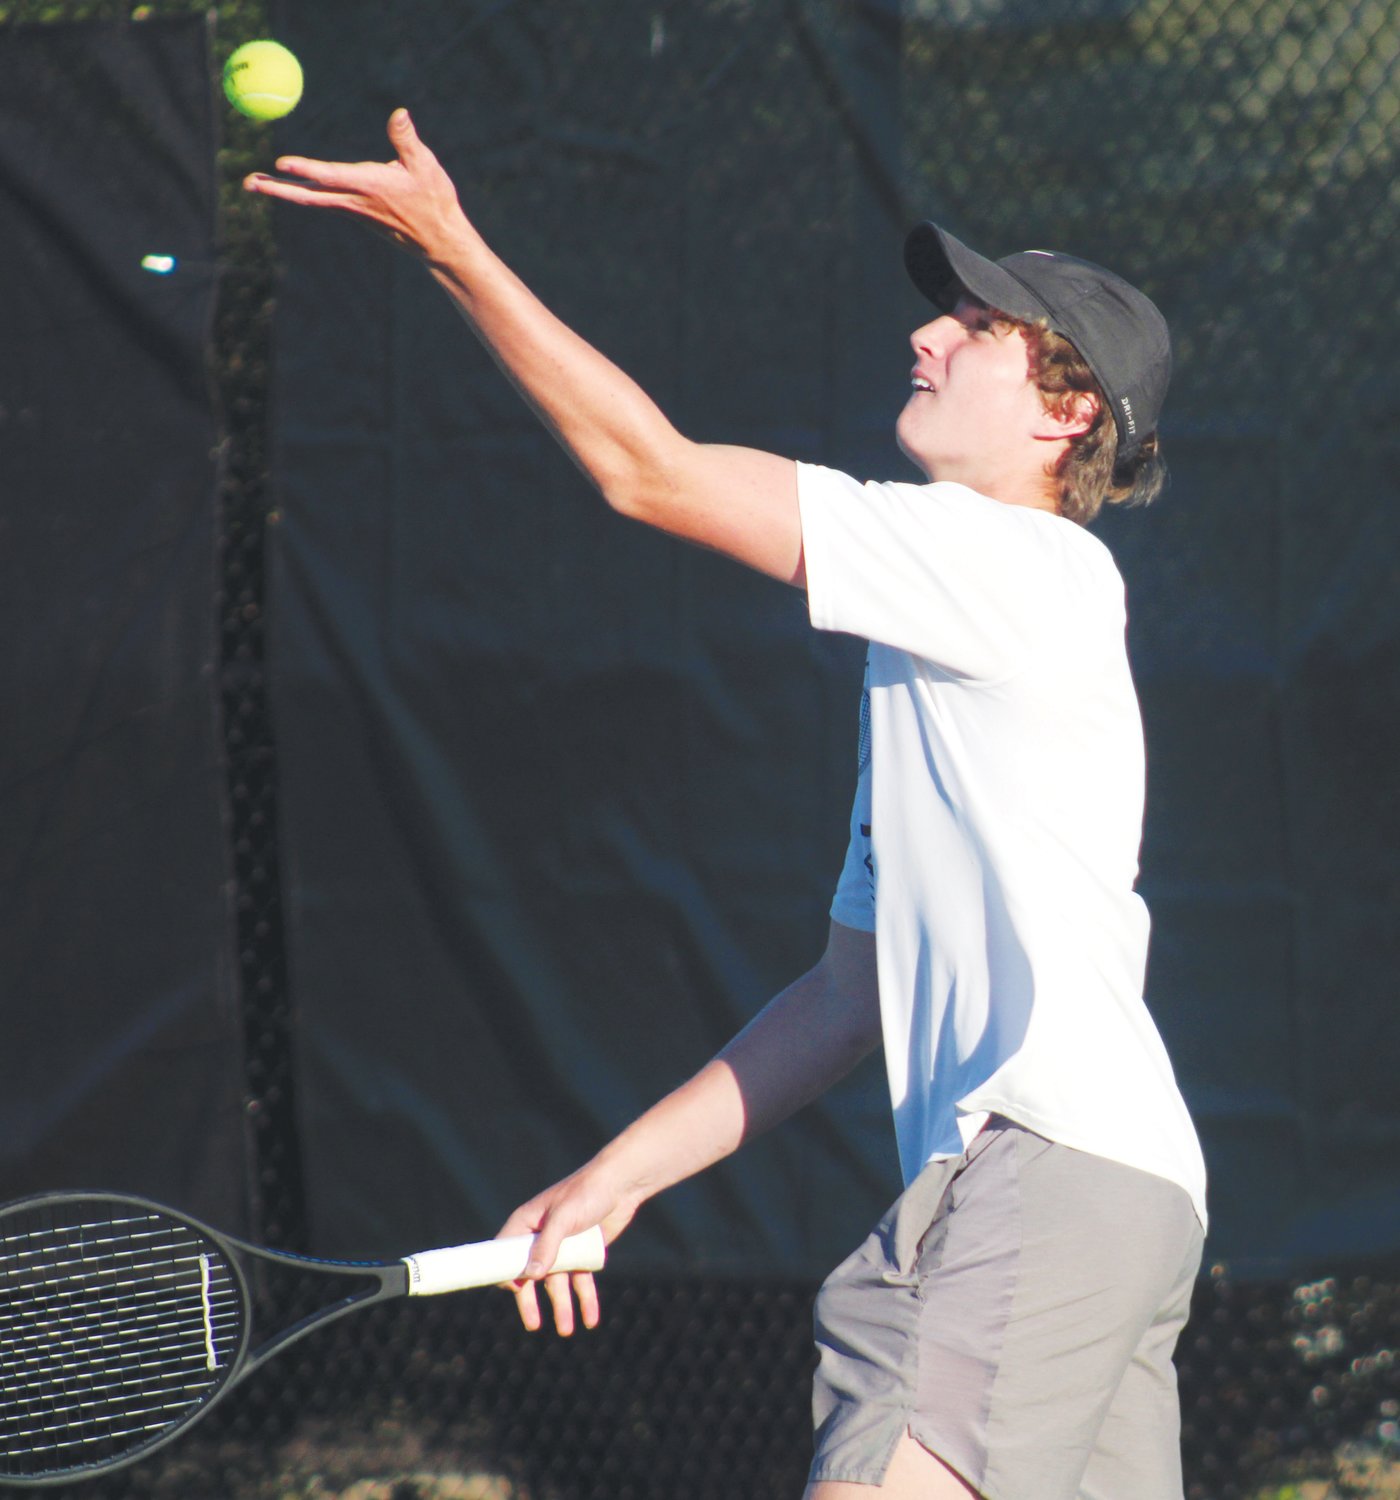 Chatham Central sophomore Jacob Gilliland prepares to serve in his doubles match against Clover Garden's Will Oldham/Blake Foley on Monday.